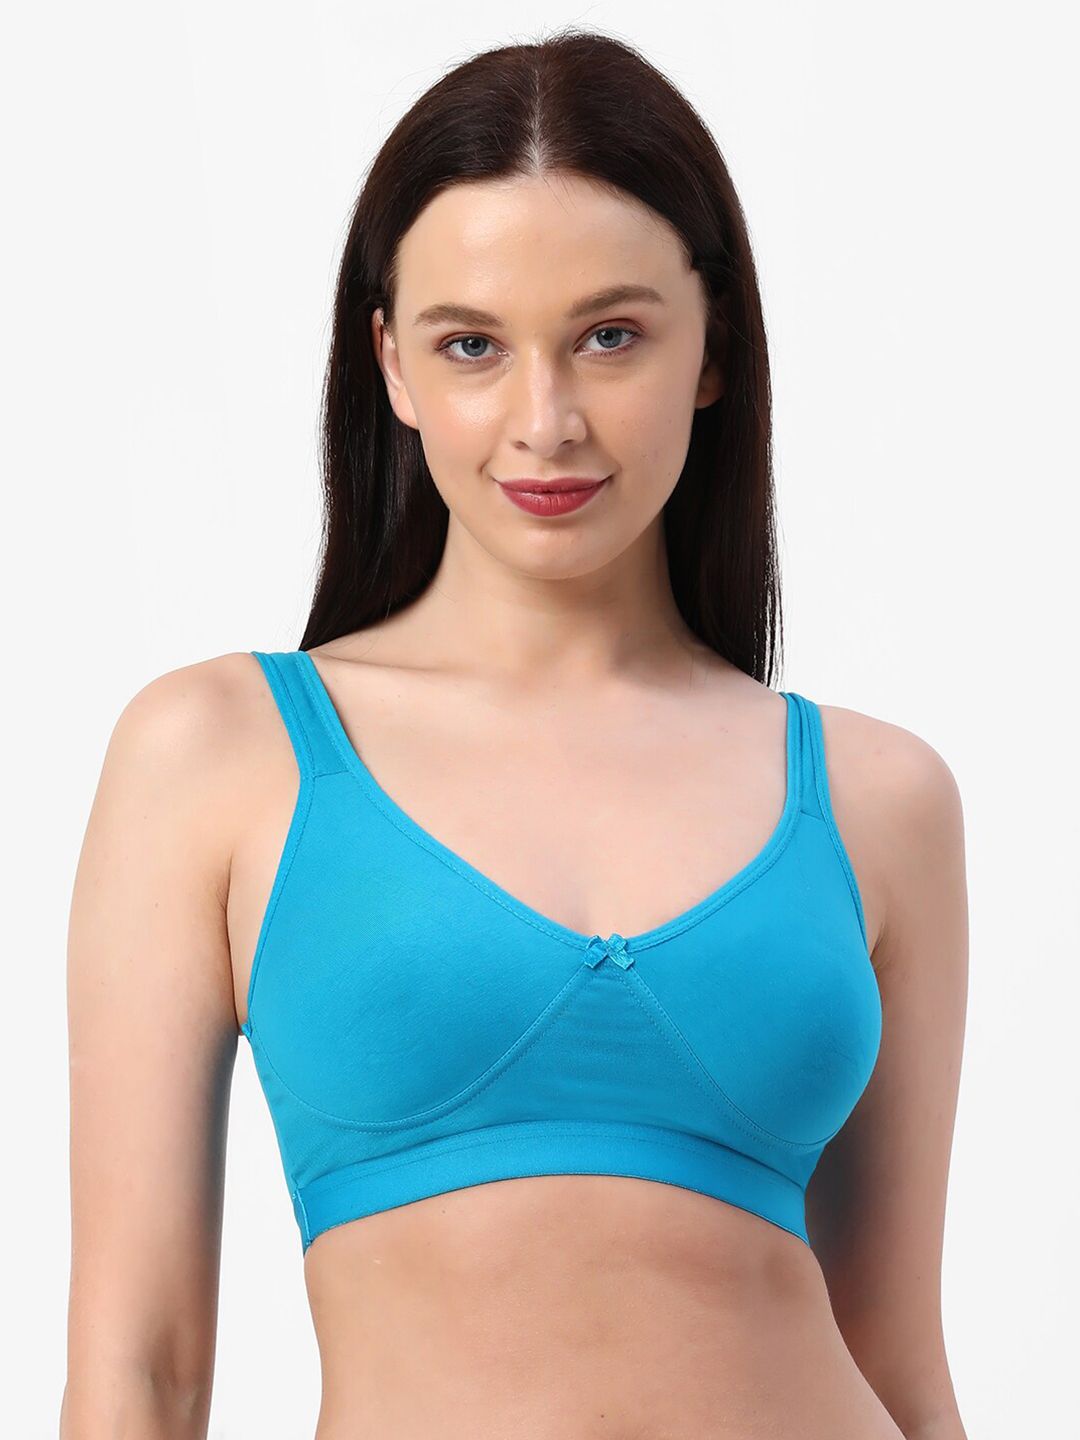 Planetinner Blue Sports Cotton Bra - Non Padded Full Coverage Price in India